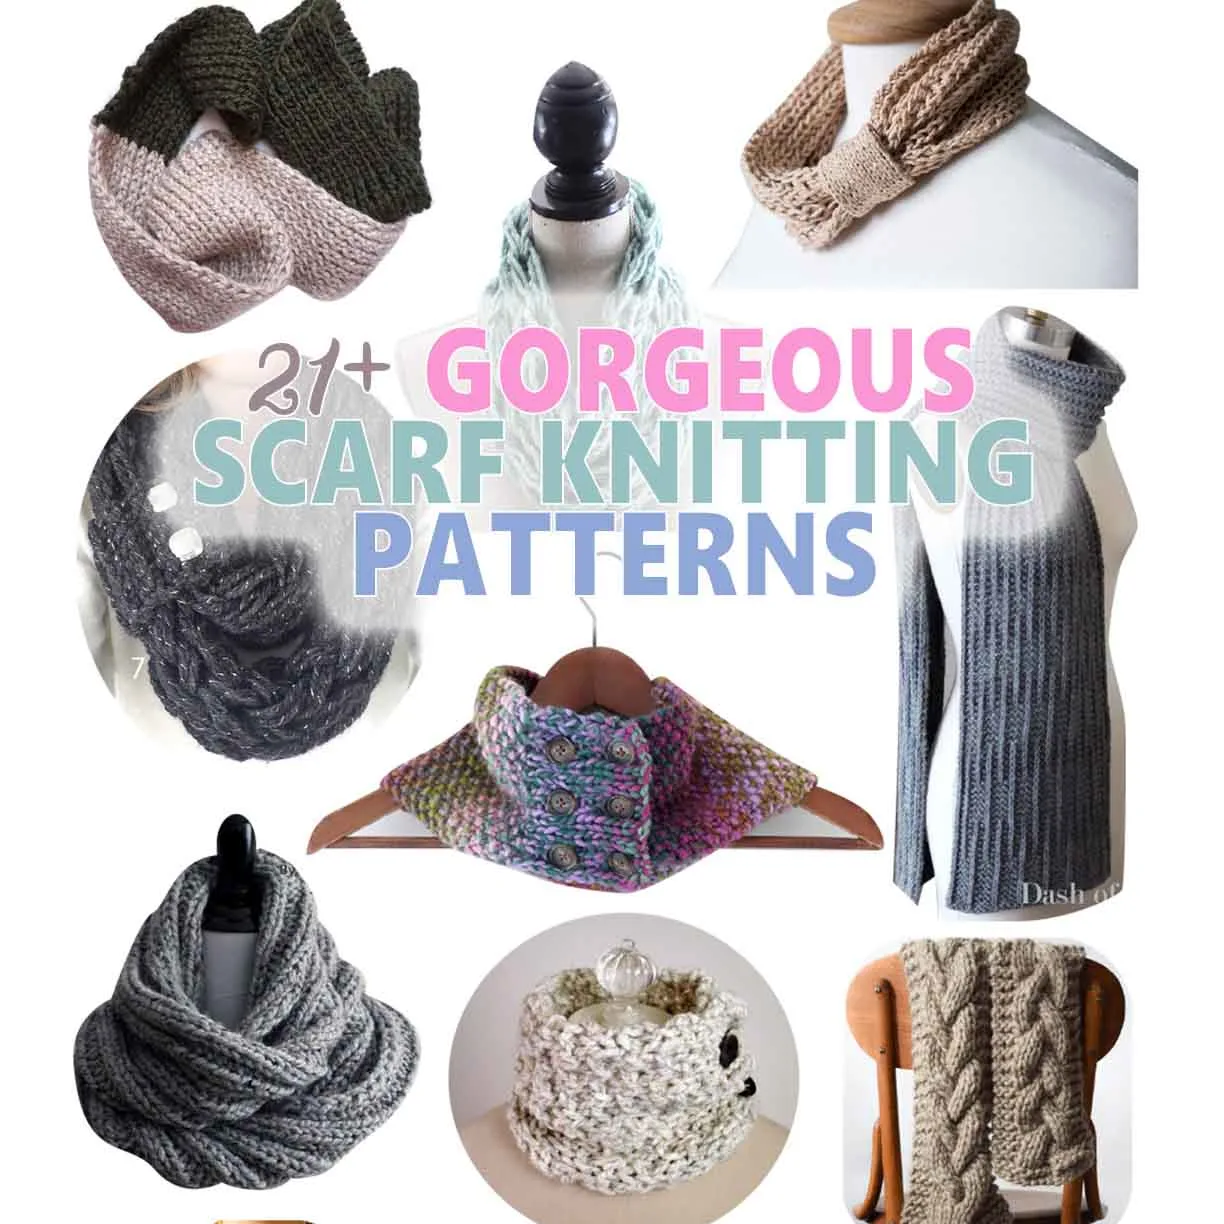 Collage of images showing some of the best scarf knitting patterns around